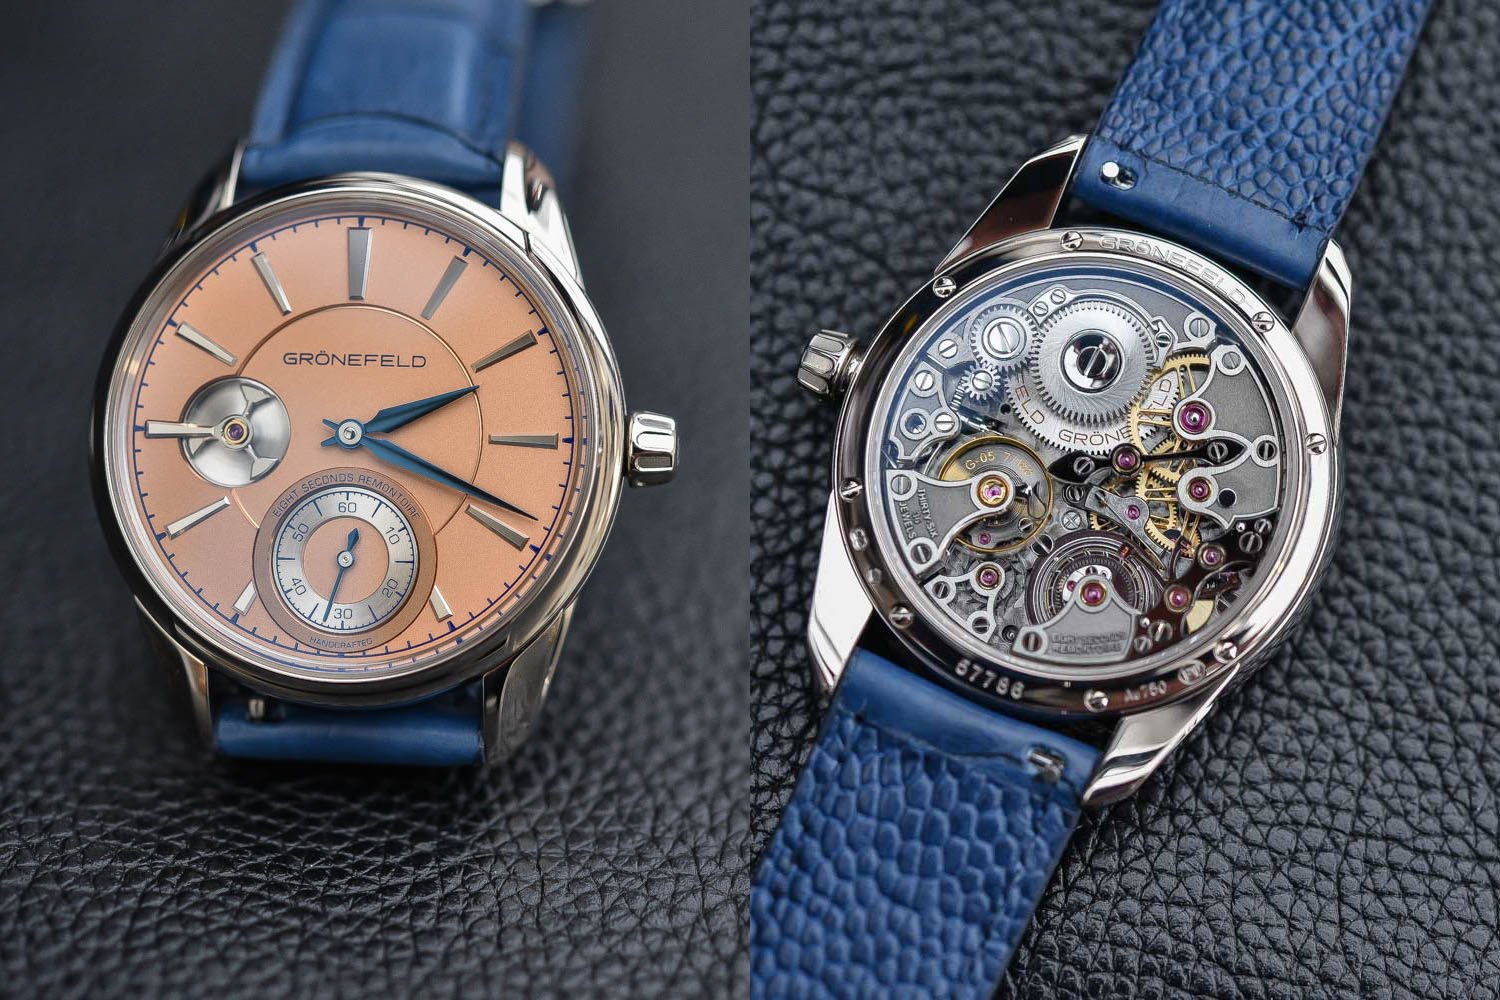 Gronefeld 1941 Remontoire - Top 5 Watches from Baselworld 2016